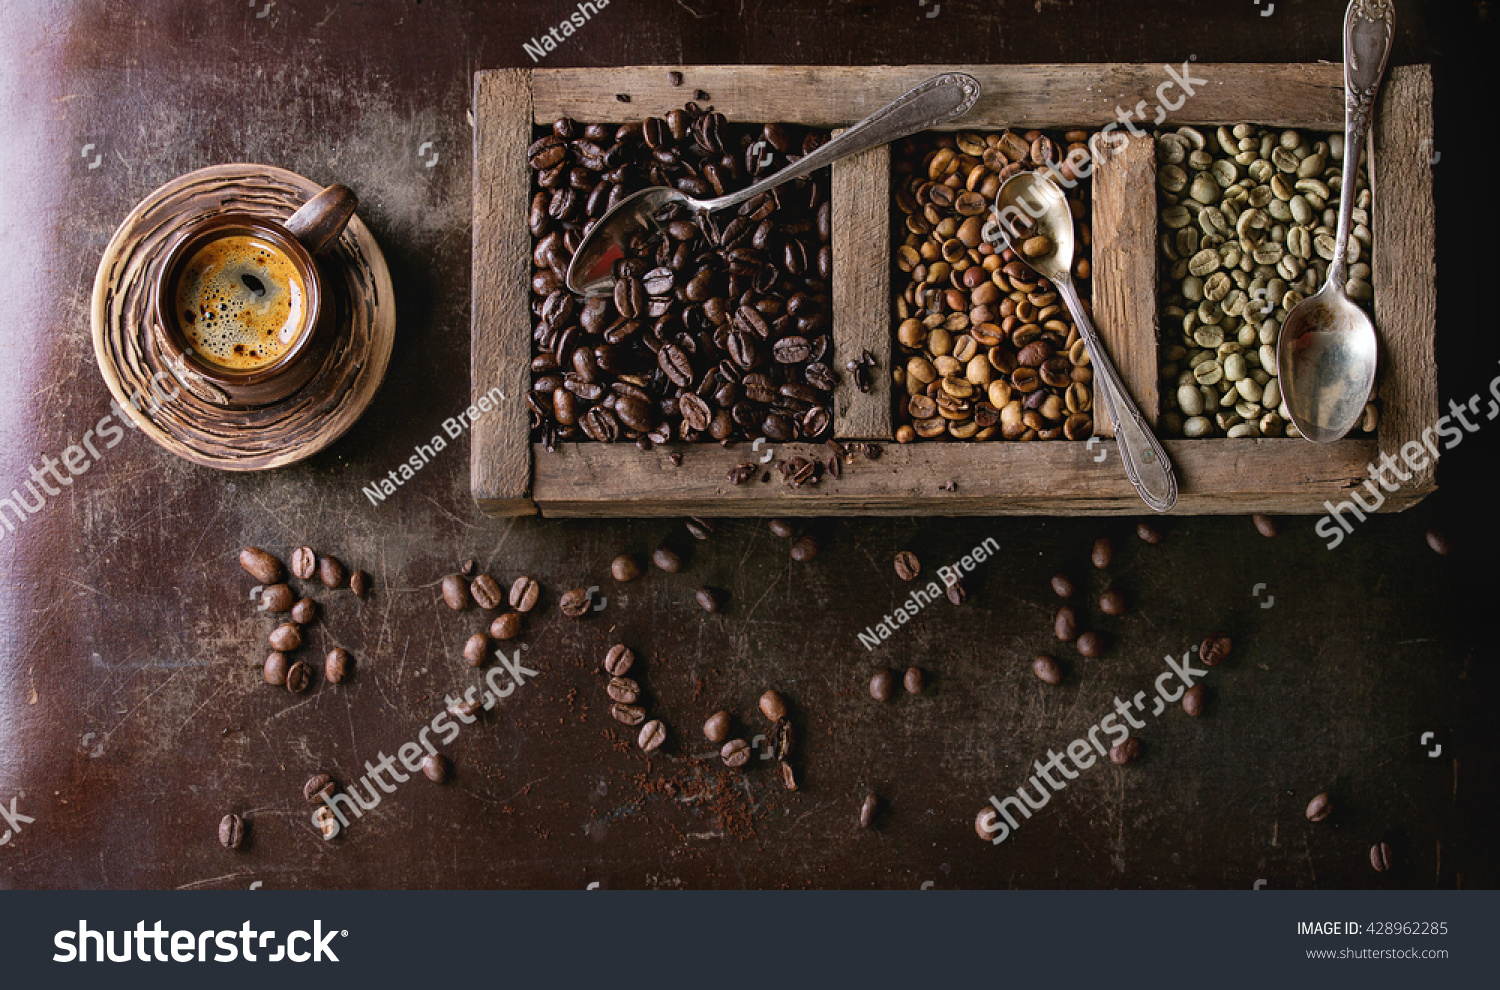 Green and brown decaf unroasted and black roasted coffee beans in old wooden box, and ceramic cup of fresh making coffee over dark brown textured background. Banner top view #428962285